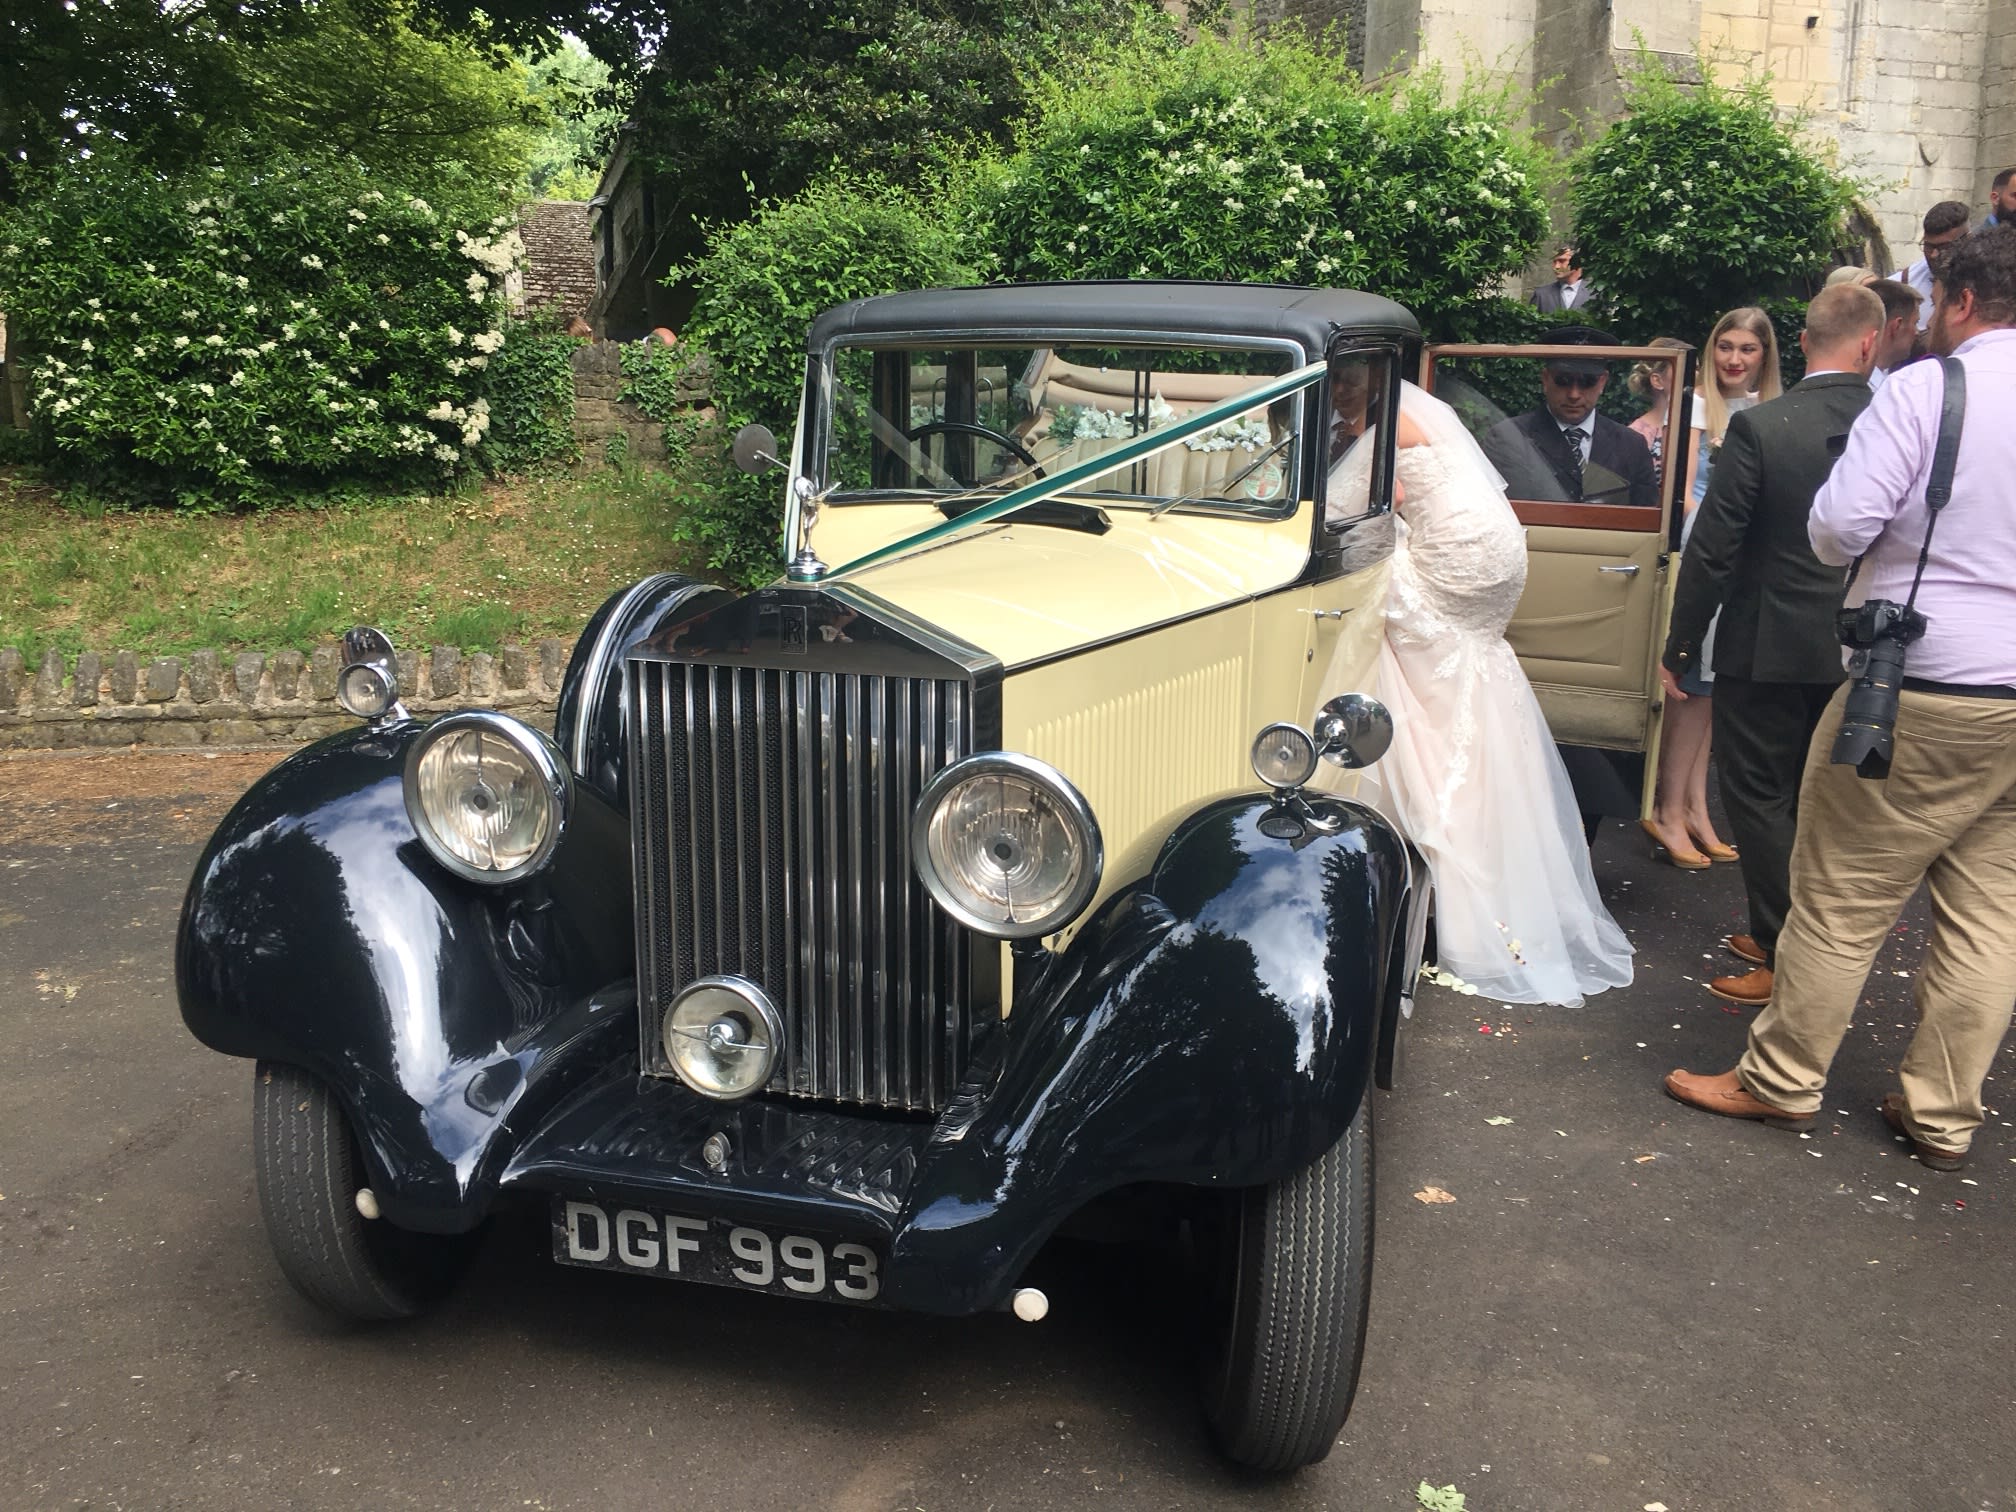 Images Bridal Carriages of Northamptonshire